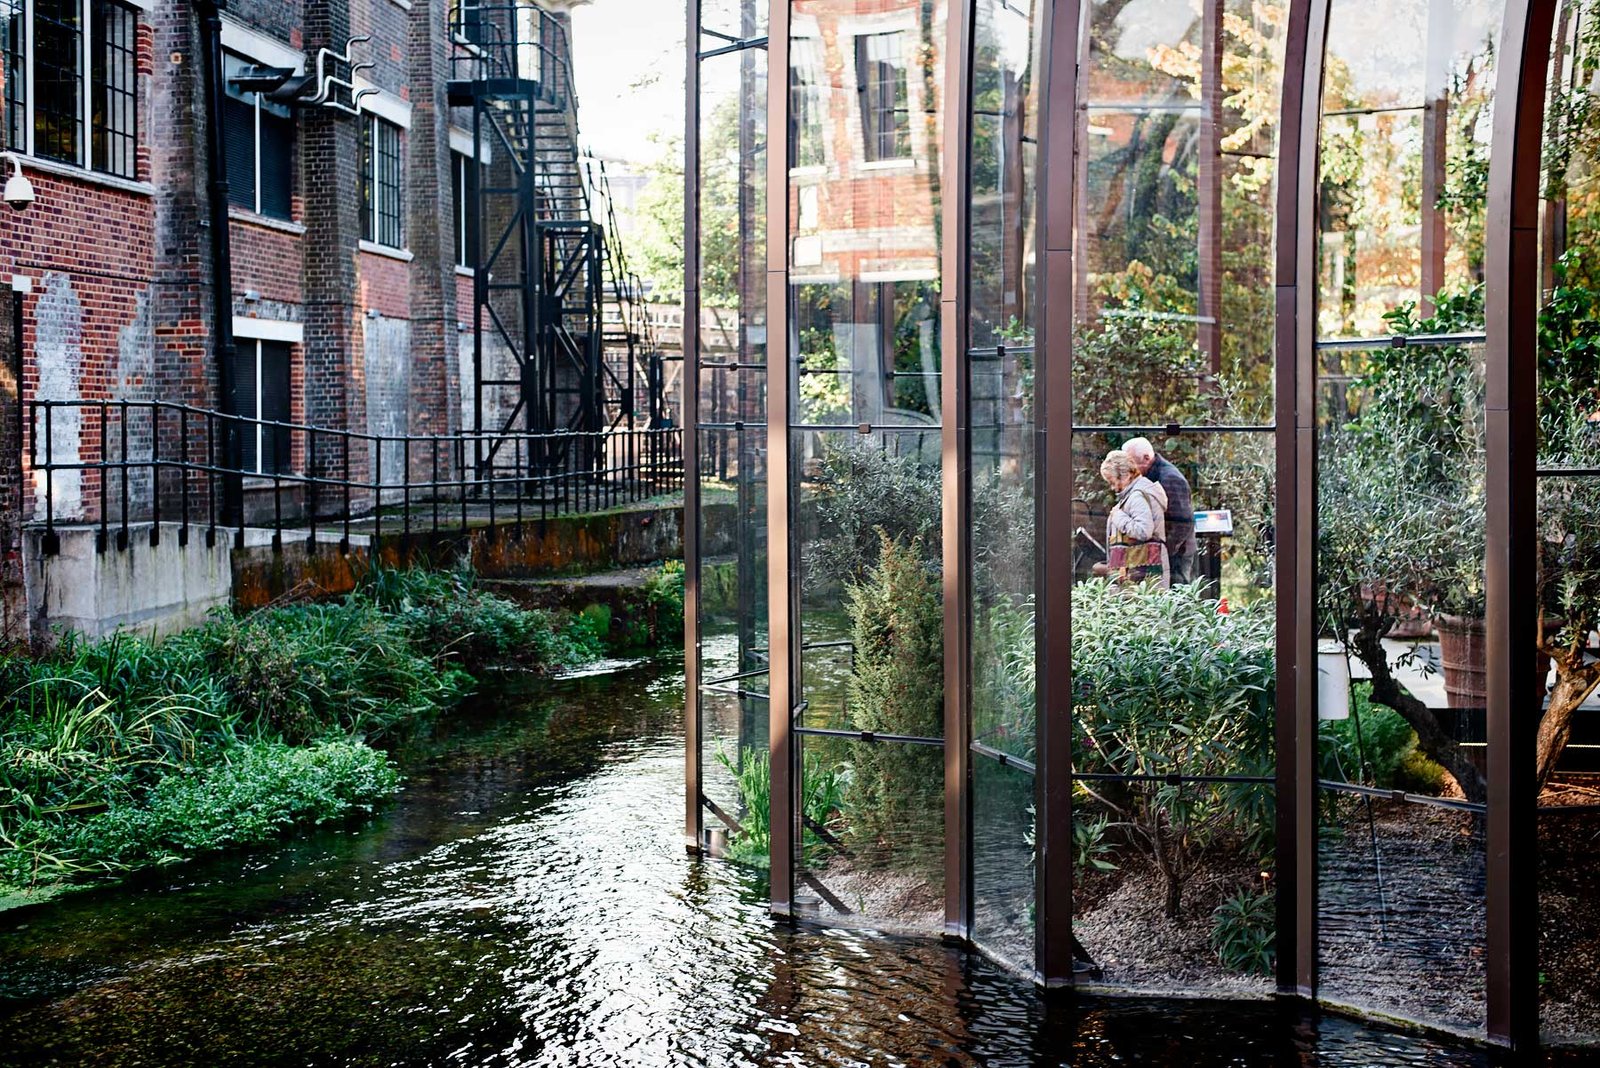 Autumn Day Trip from London to Hampshire - Bombay Sapphire Distillery Glasshouses